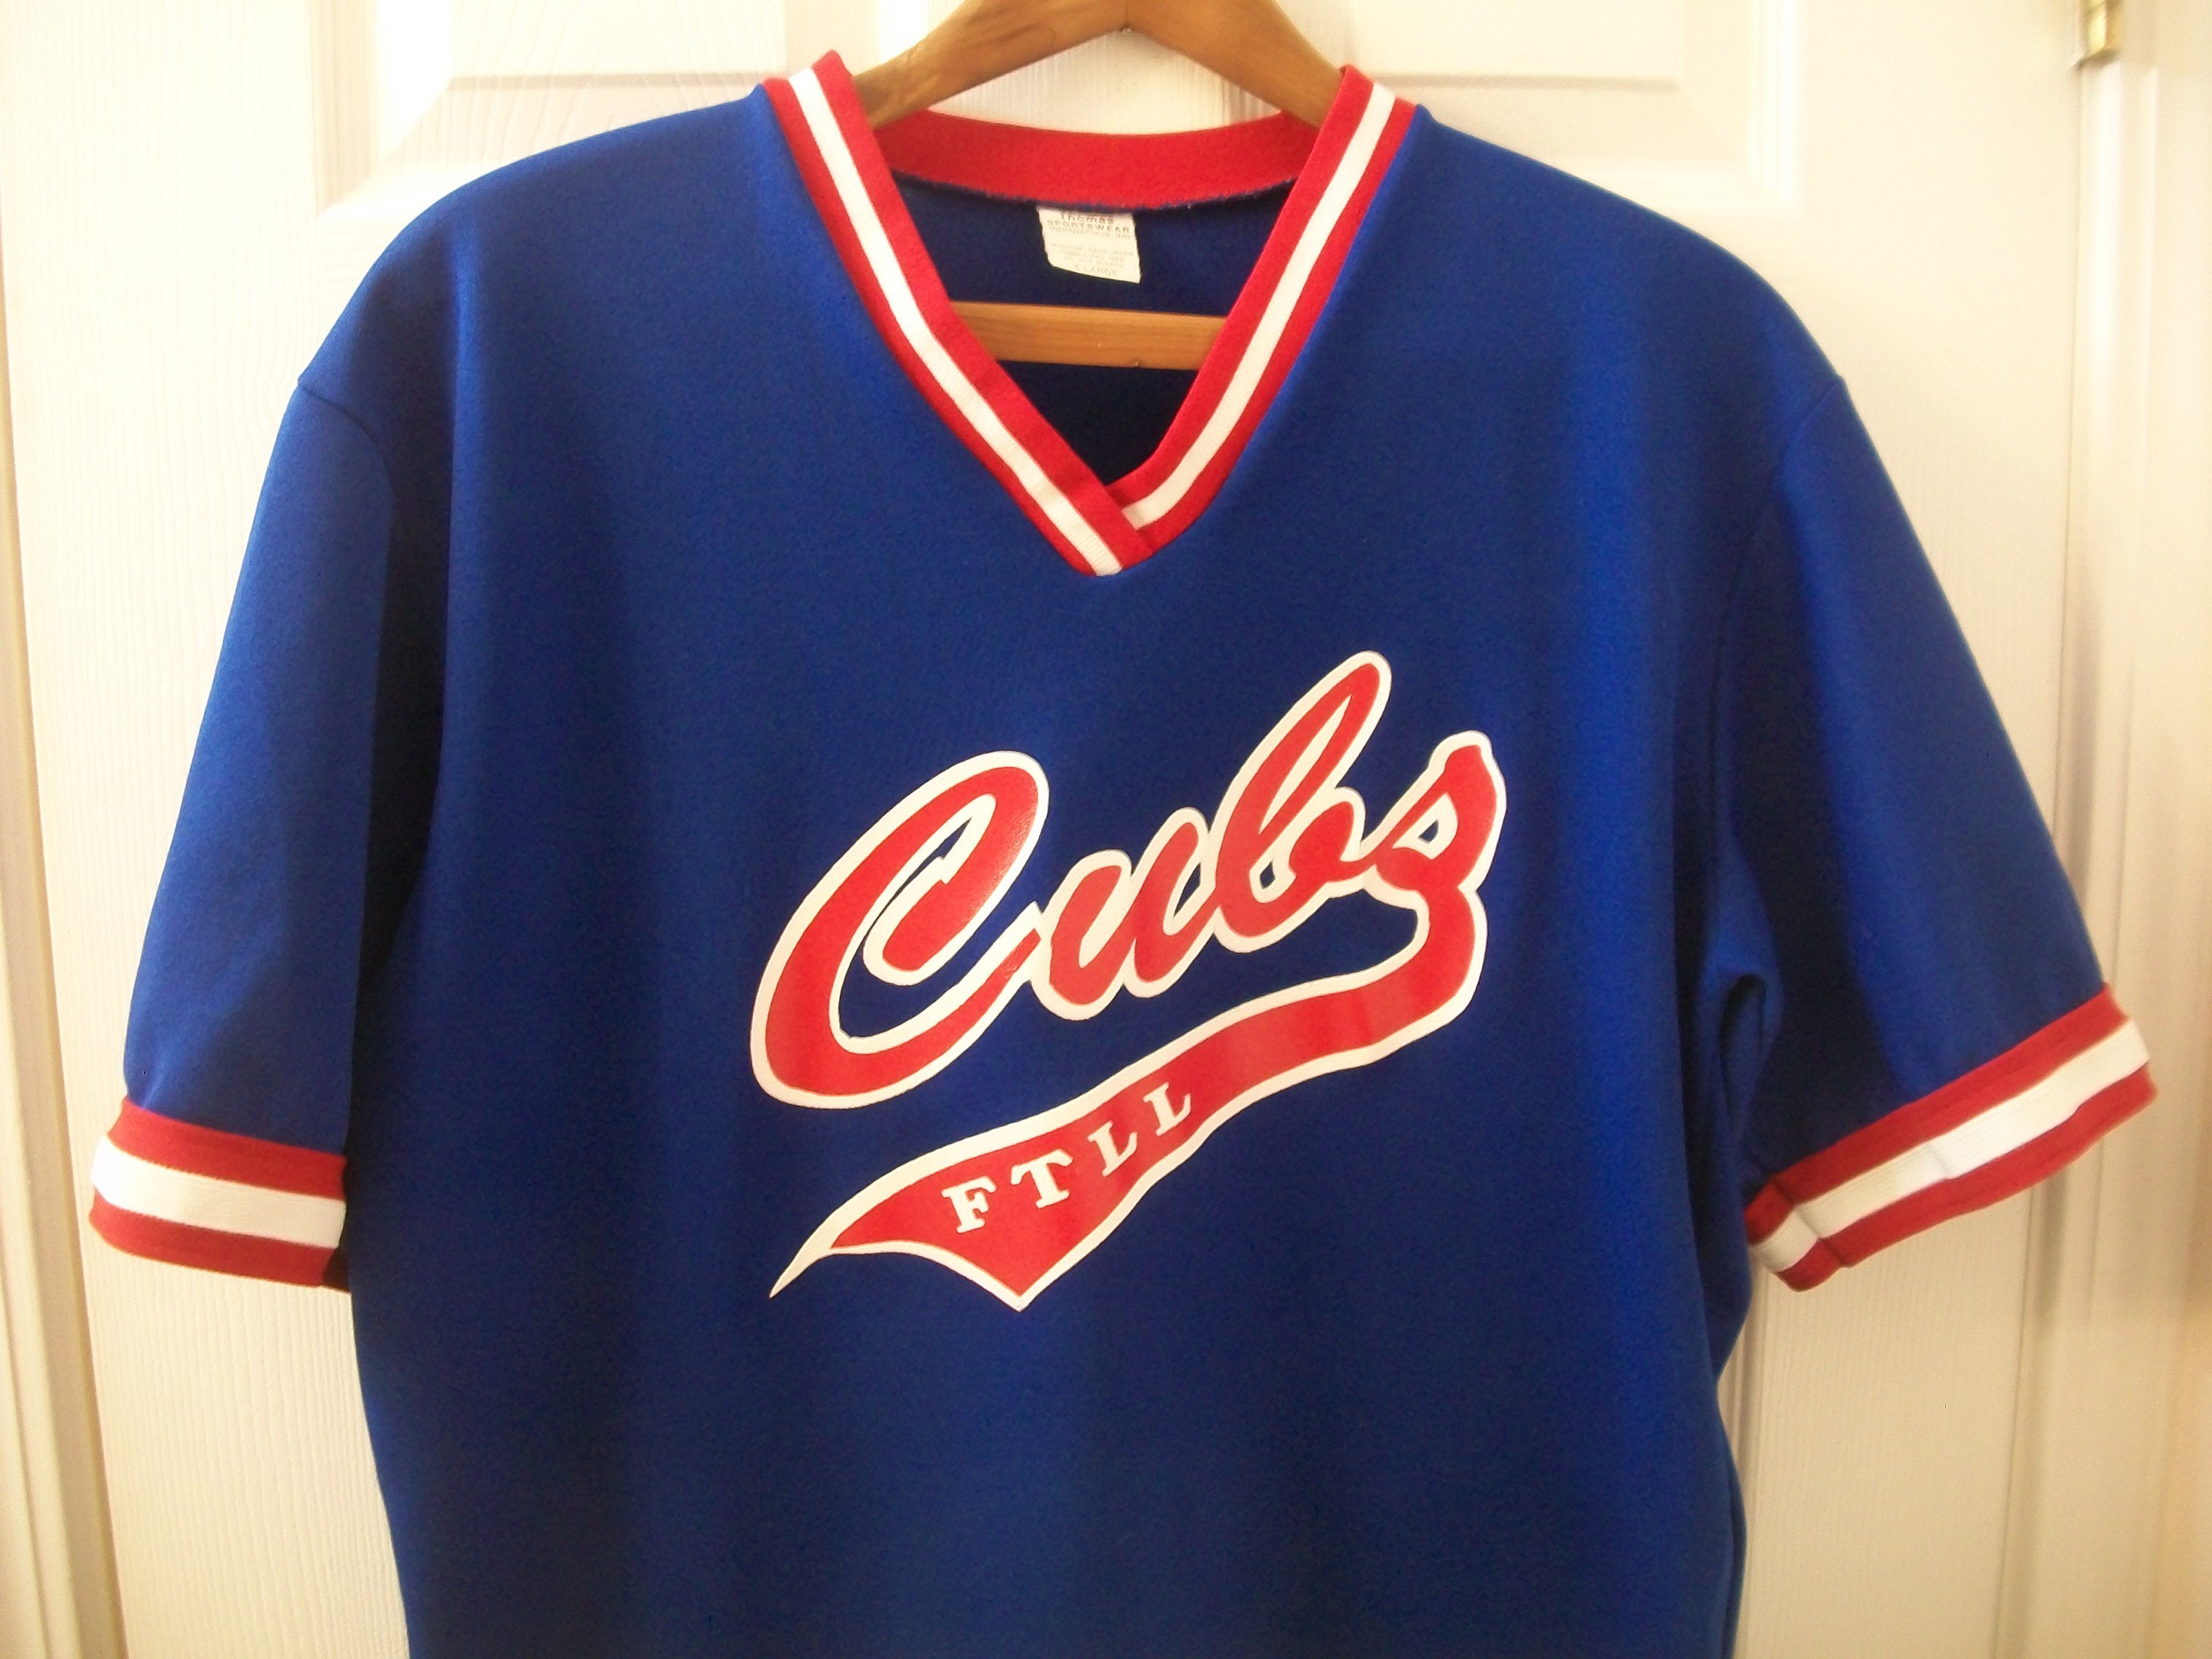 Vintage 80s Cubs Jersey XL Baseball Coach Little League Team Manager Ftll Franklin Township MLB Chicago Wrigley Field #52 Williams Polyester